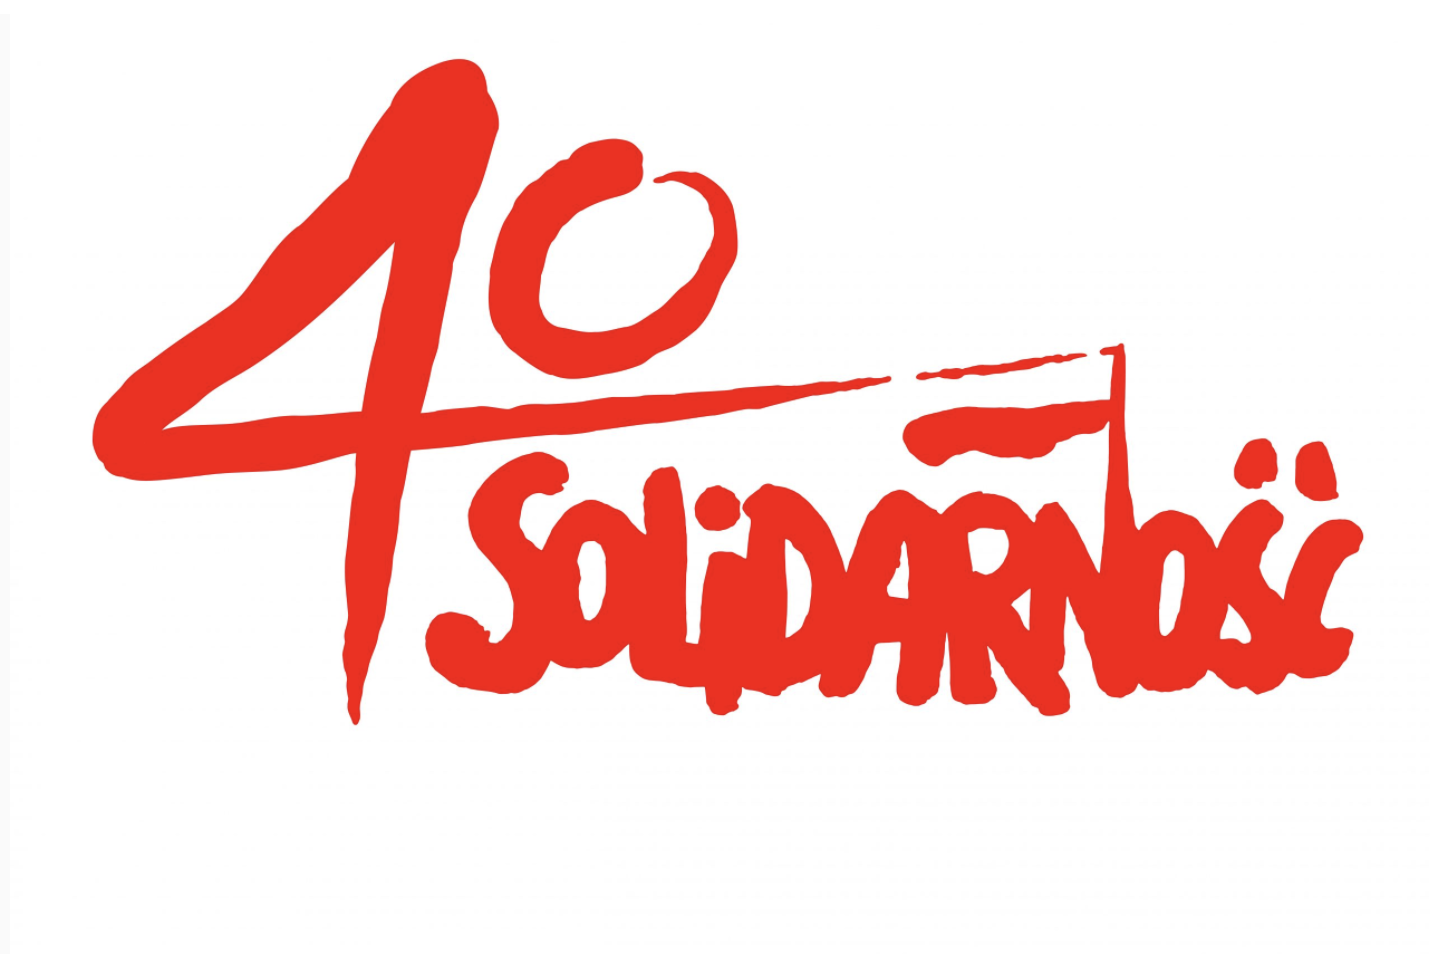 The 40th anniversary of the signing of the August Solidarity Agreements and the 81st anniversary of the outbreak of World War II